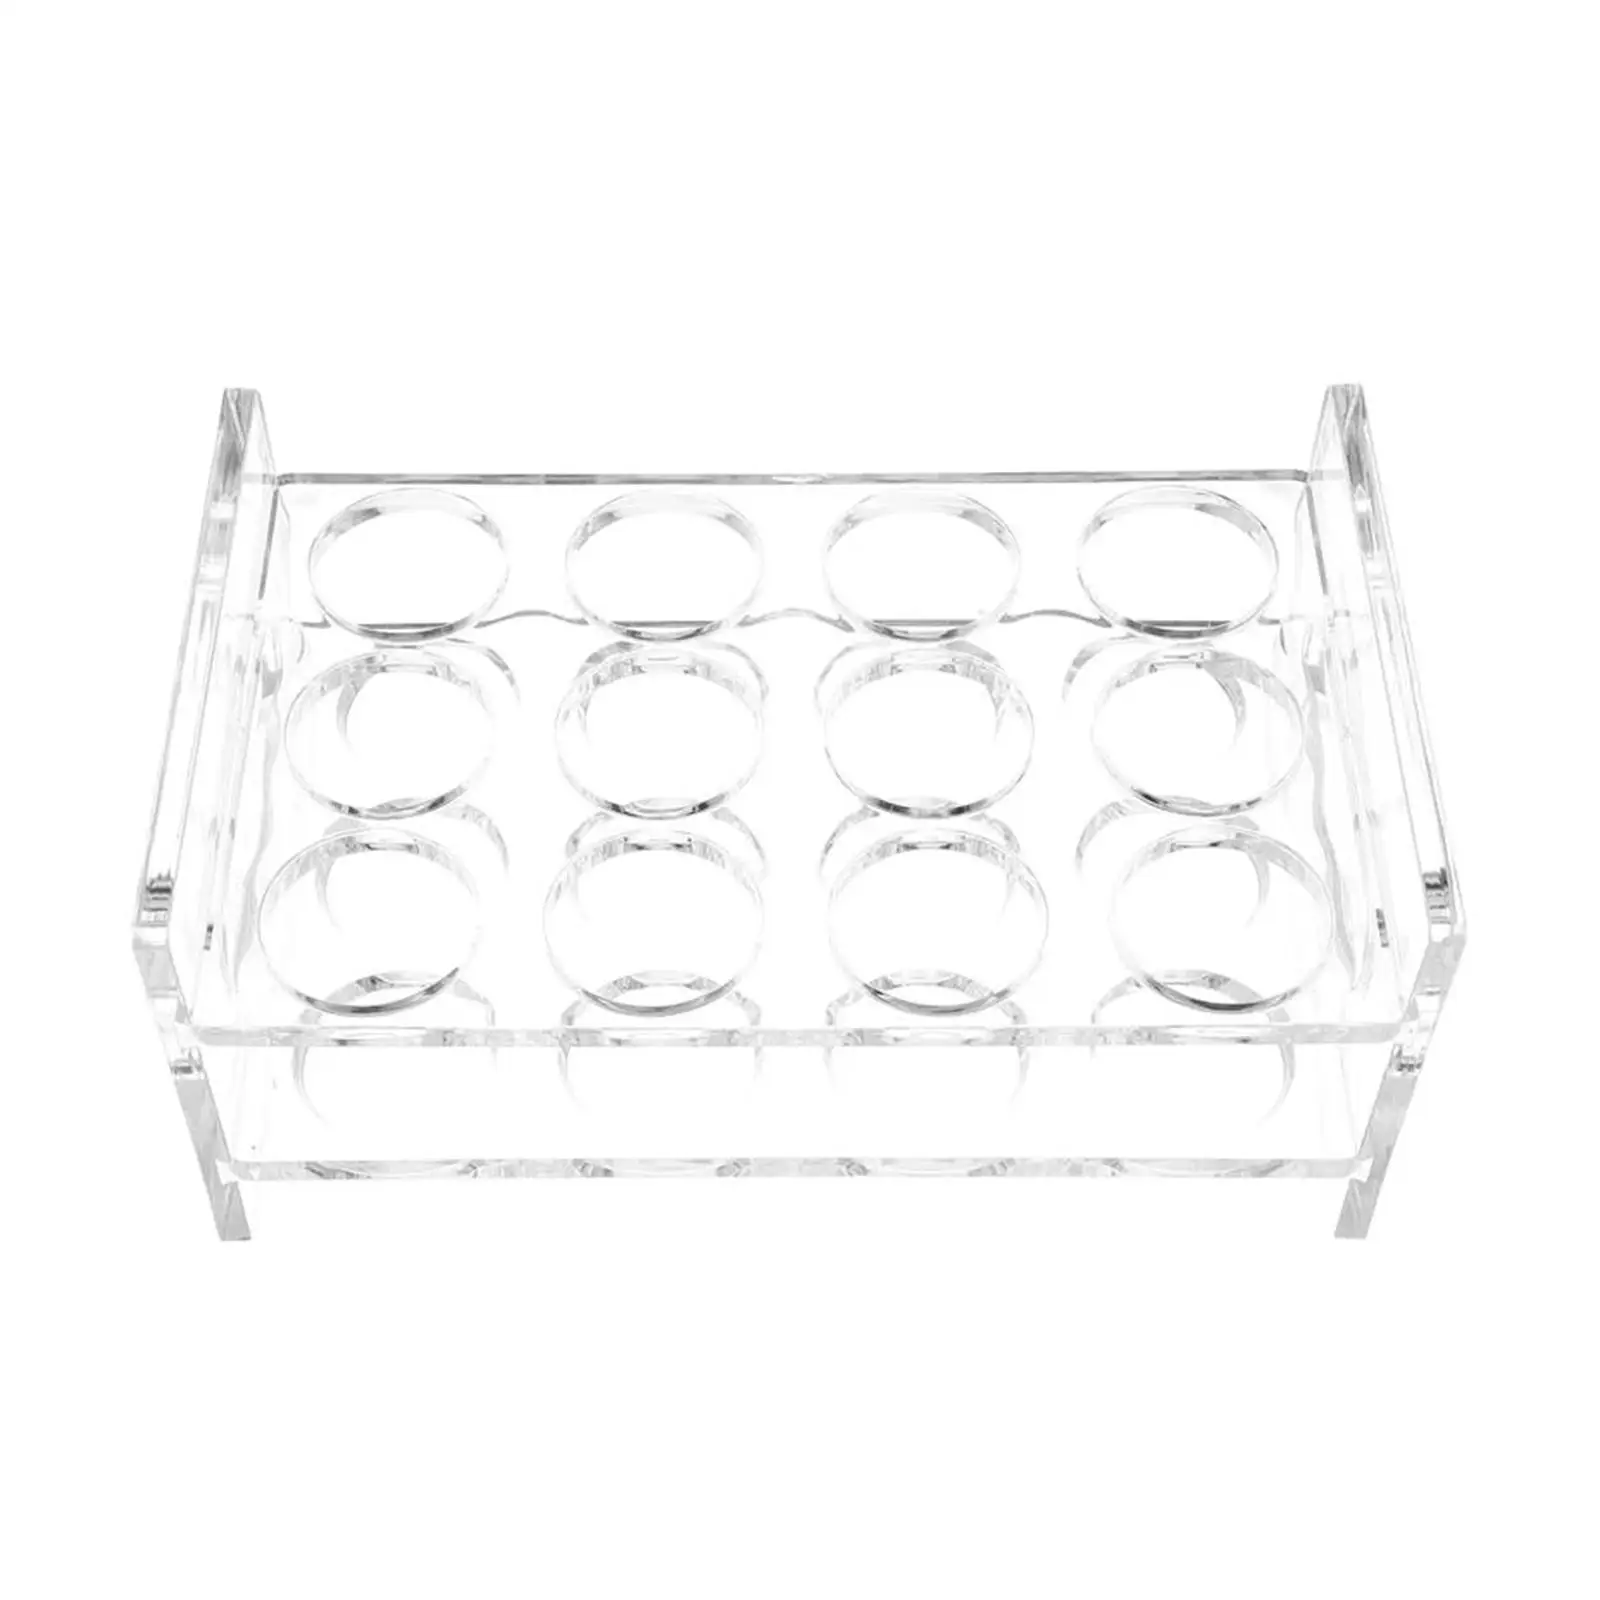 12 Round Holes Cup Rack Stylish 3 Rows Cup Rack Portable Clear Unique Drinks